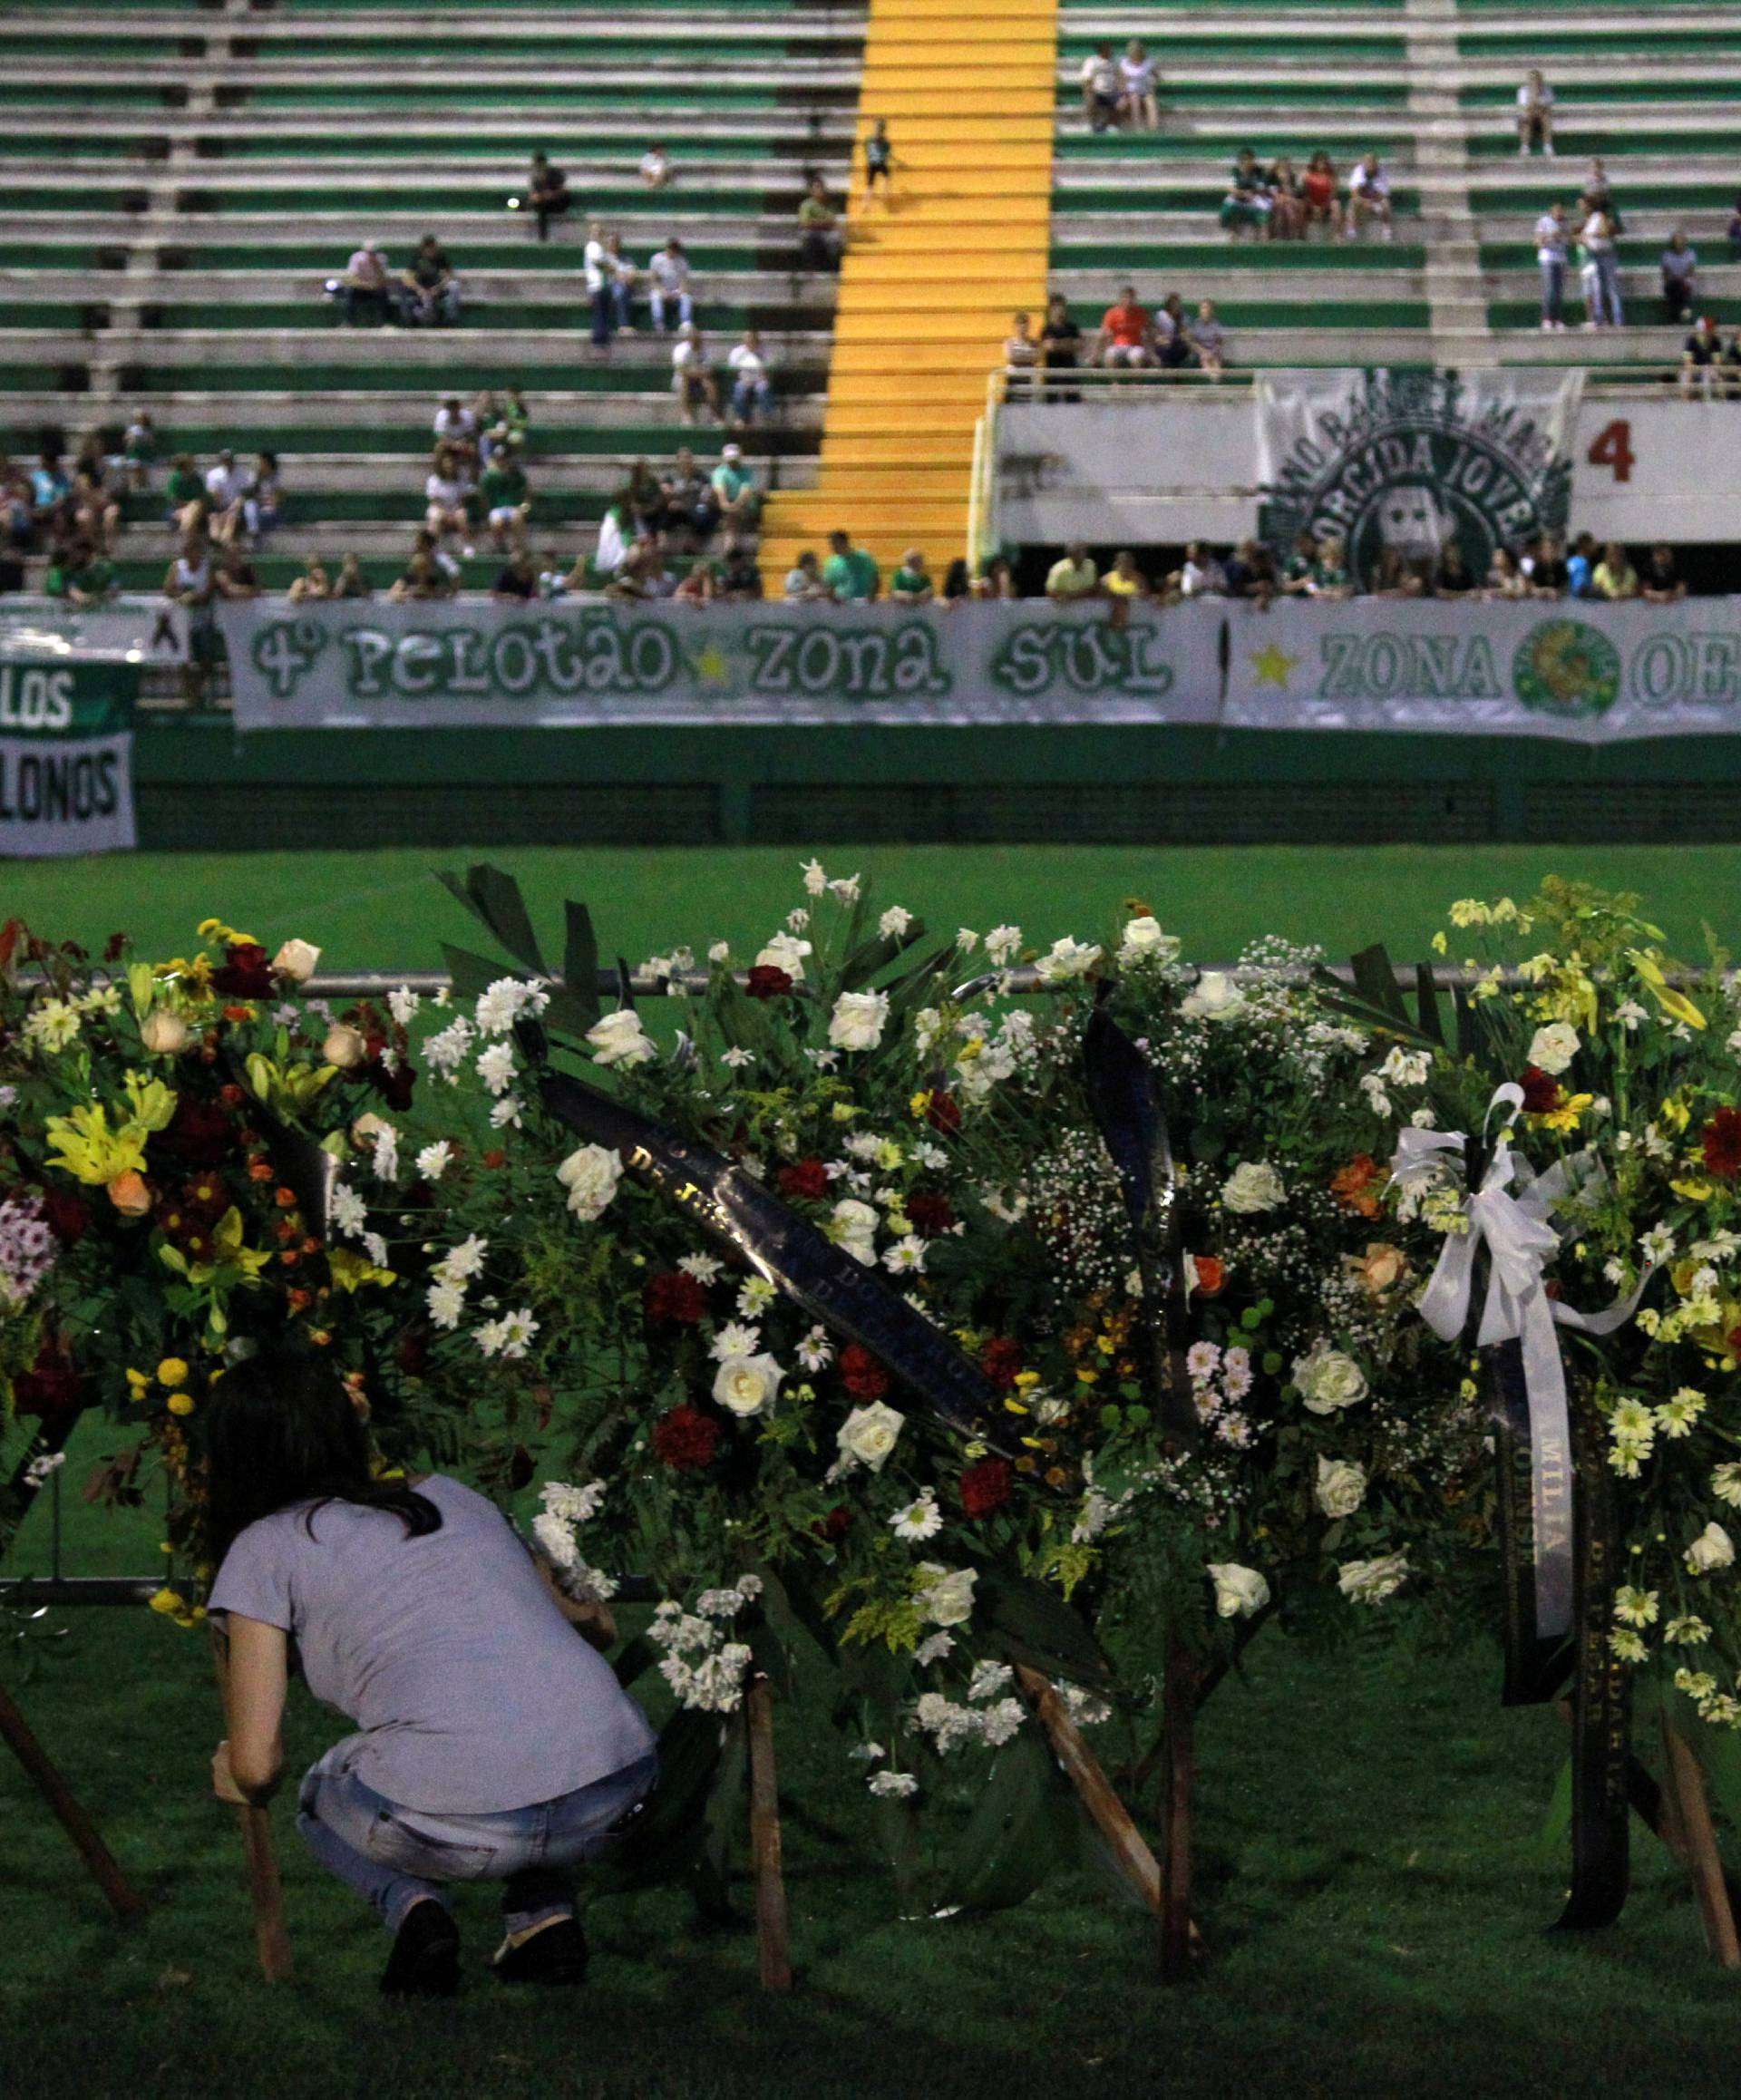 A woman places flowers before a mourning ceremony for victims after a plane carrying Brazil's soccer team Chapecoense crashed in Colombia, at Arena Conda stadium in Chapeco